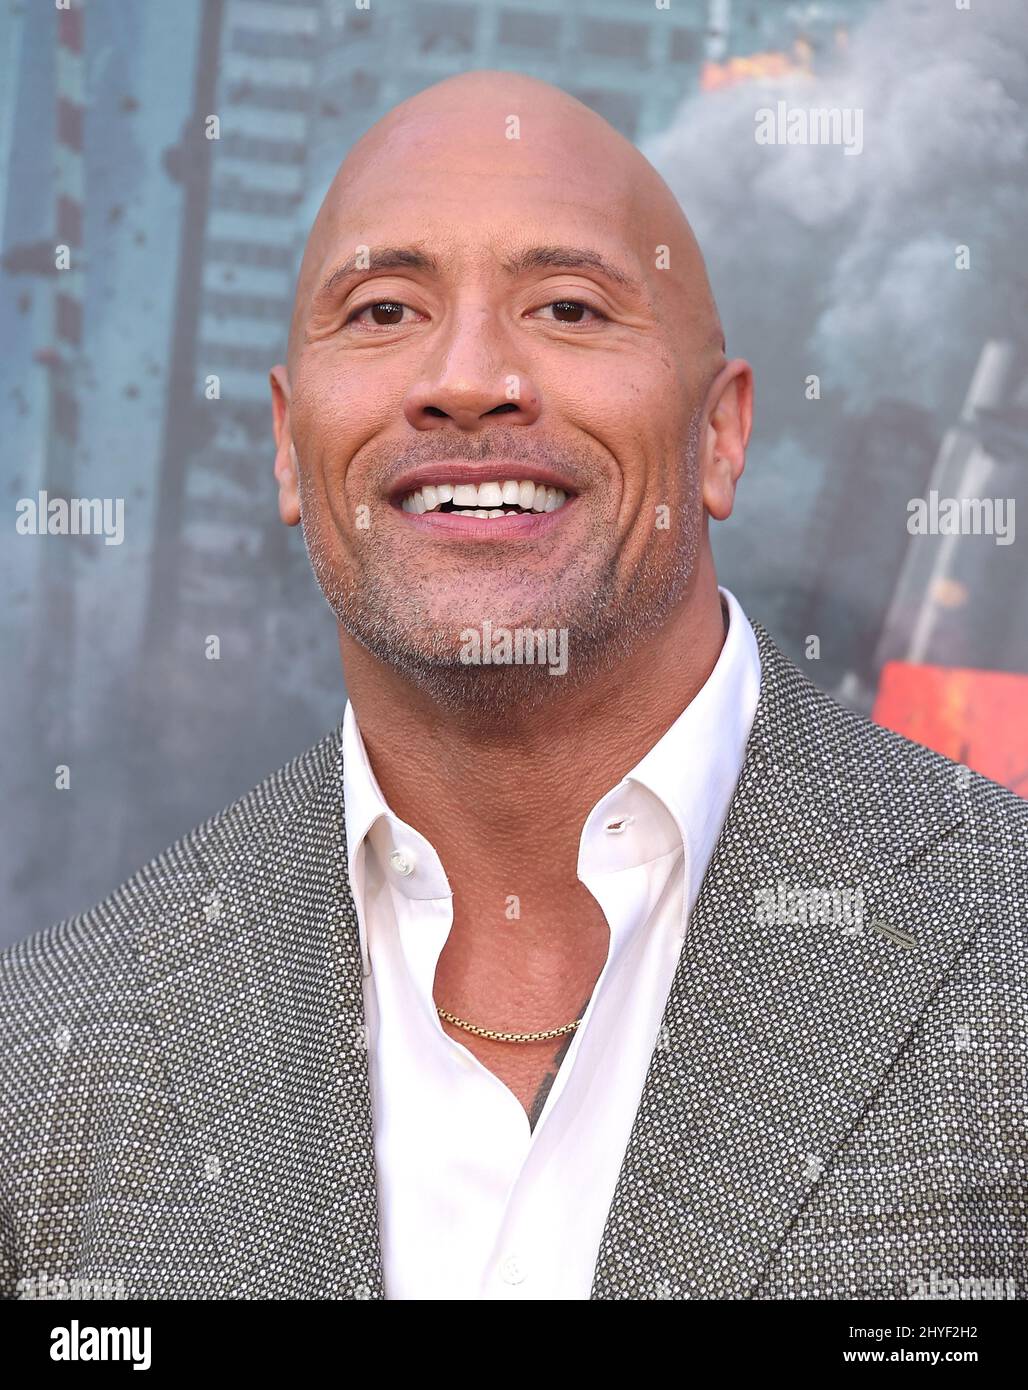 Bob Magnum-DWAYNE JOHNSON, Calvin Joyner-KEVIN HART in New Line Cinema's  and Universal Pictures' action comedy CENTRAL INTELLIGENCE, a Warner  Bros. Pictures release. Poster Stock Photo - Alamy